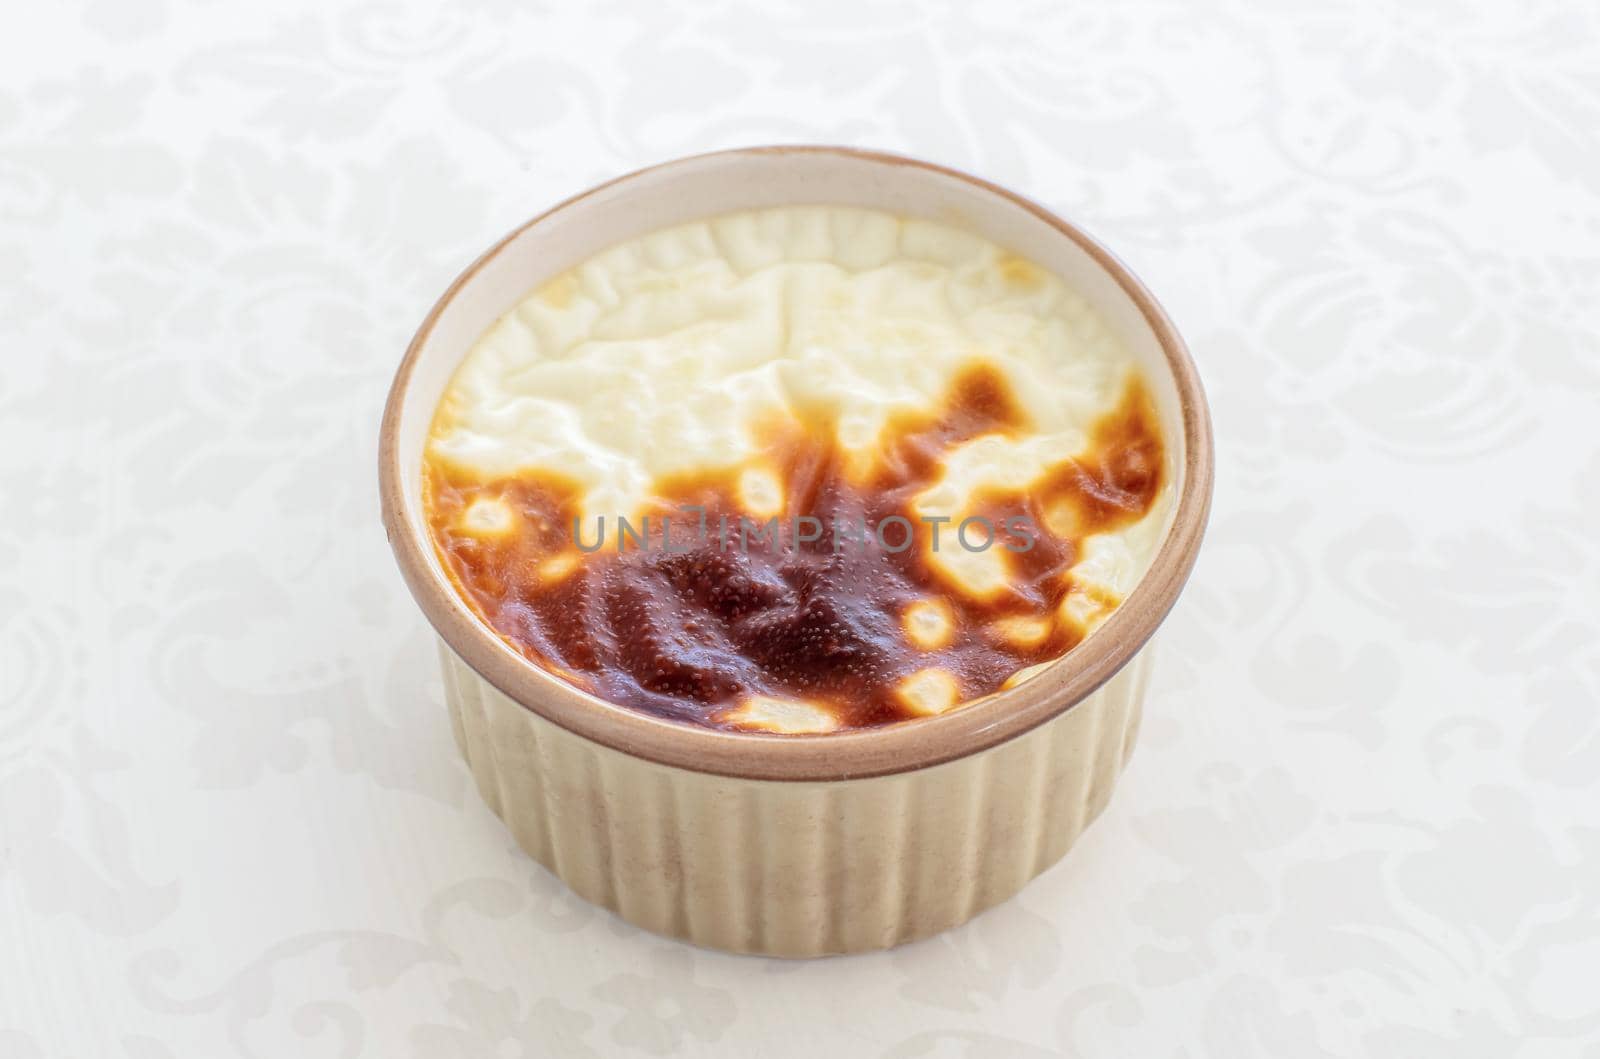 Bakery rice pudding. Turkish milky sweet sutlac in casserole